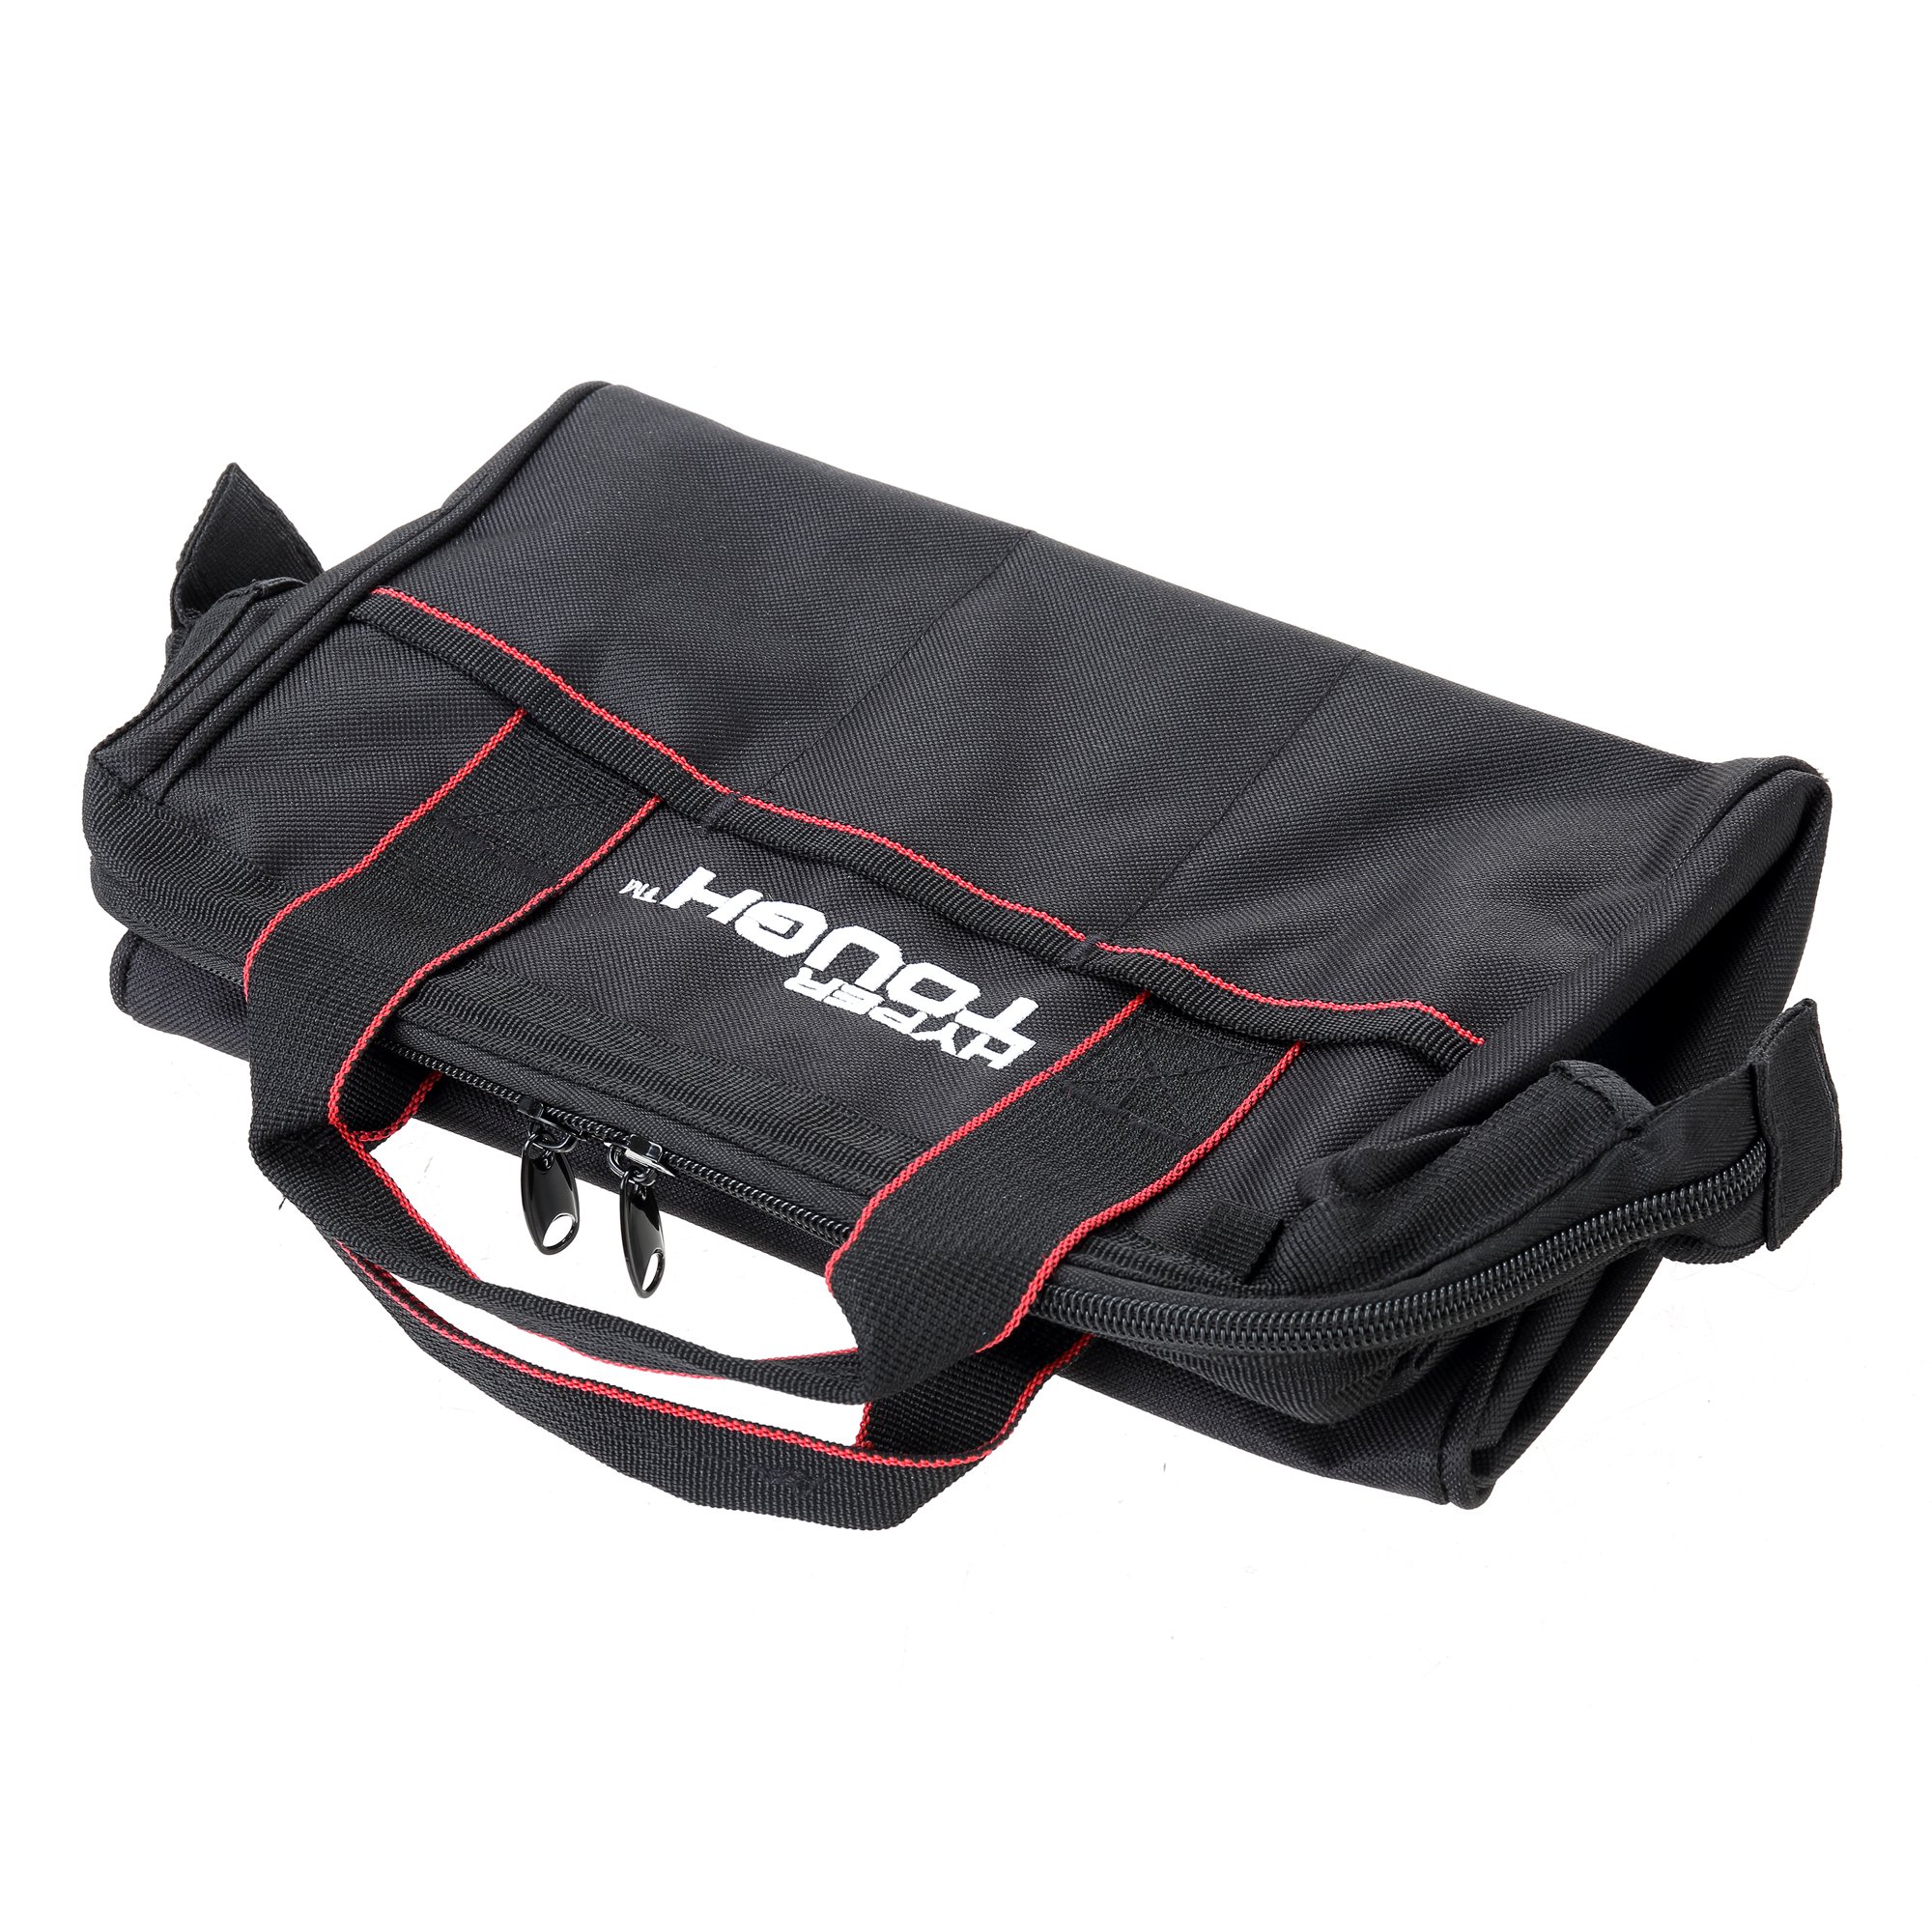 12 Inch Customized Small Soft Tool Bag With Big Mouth